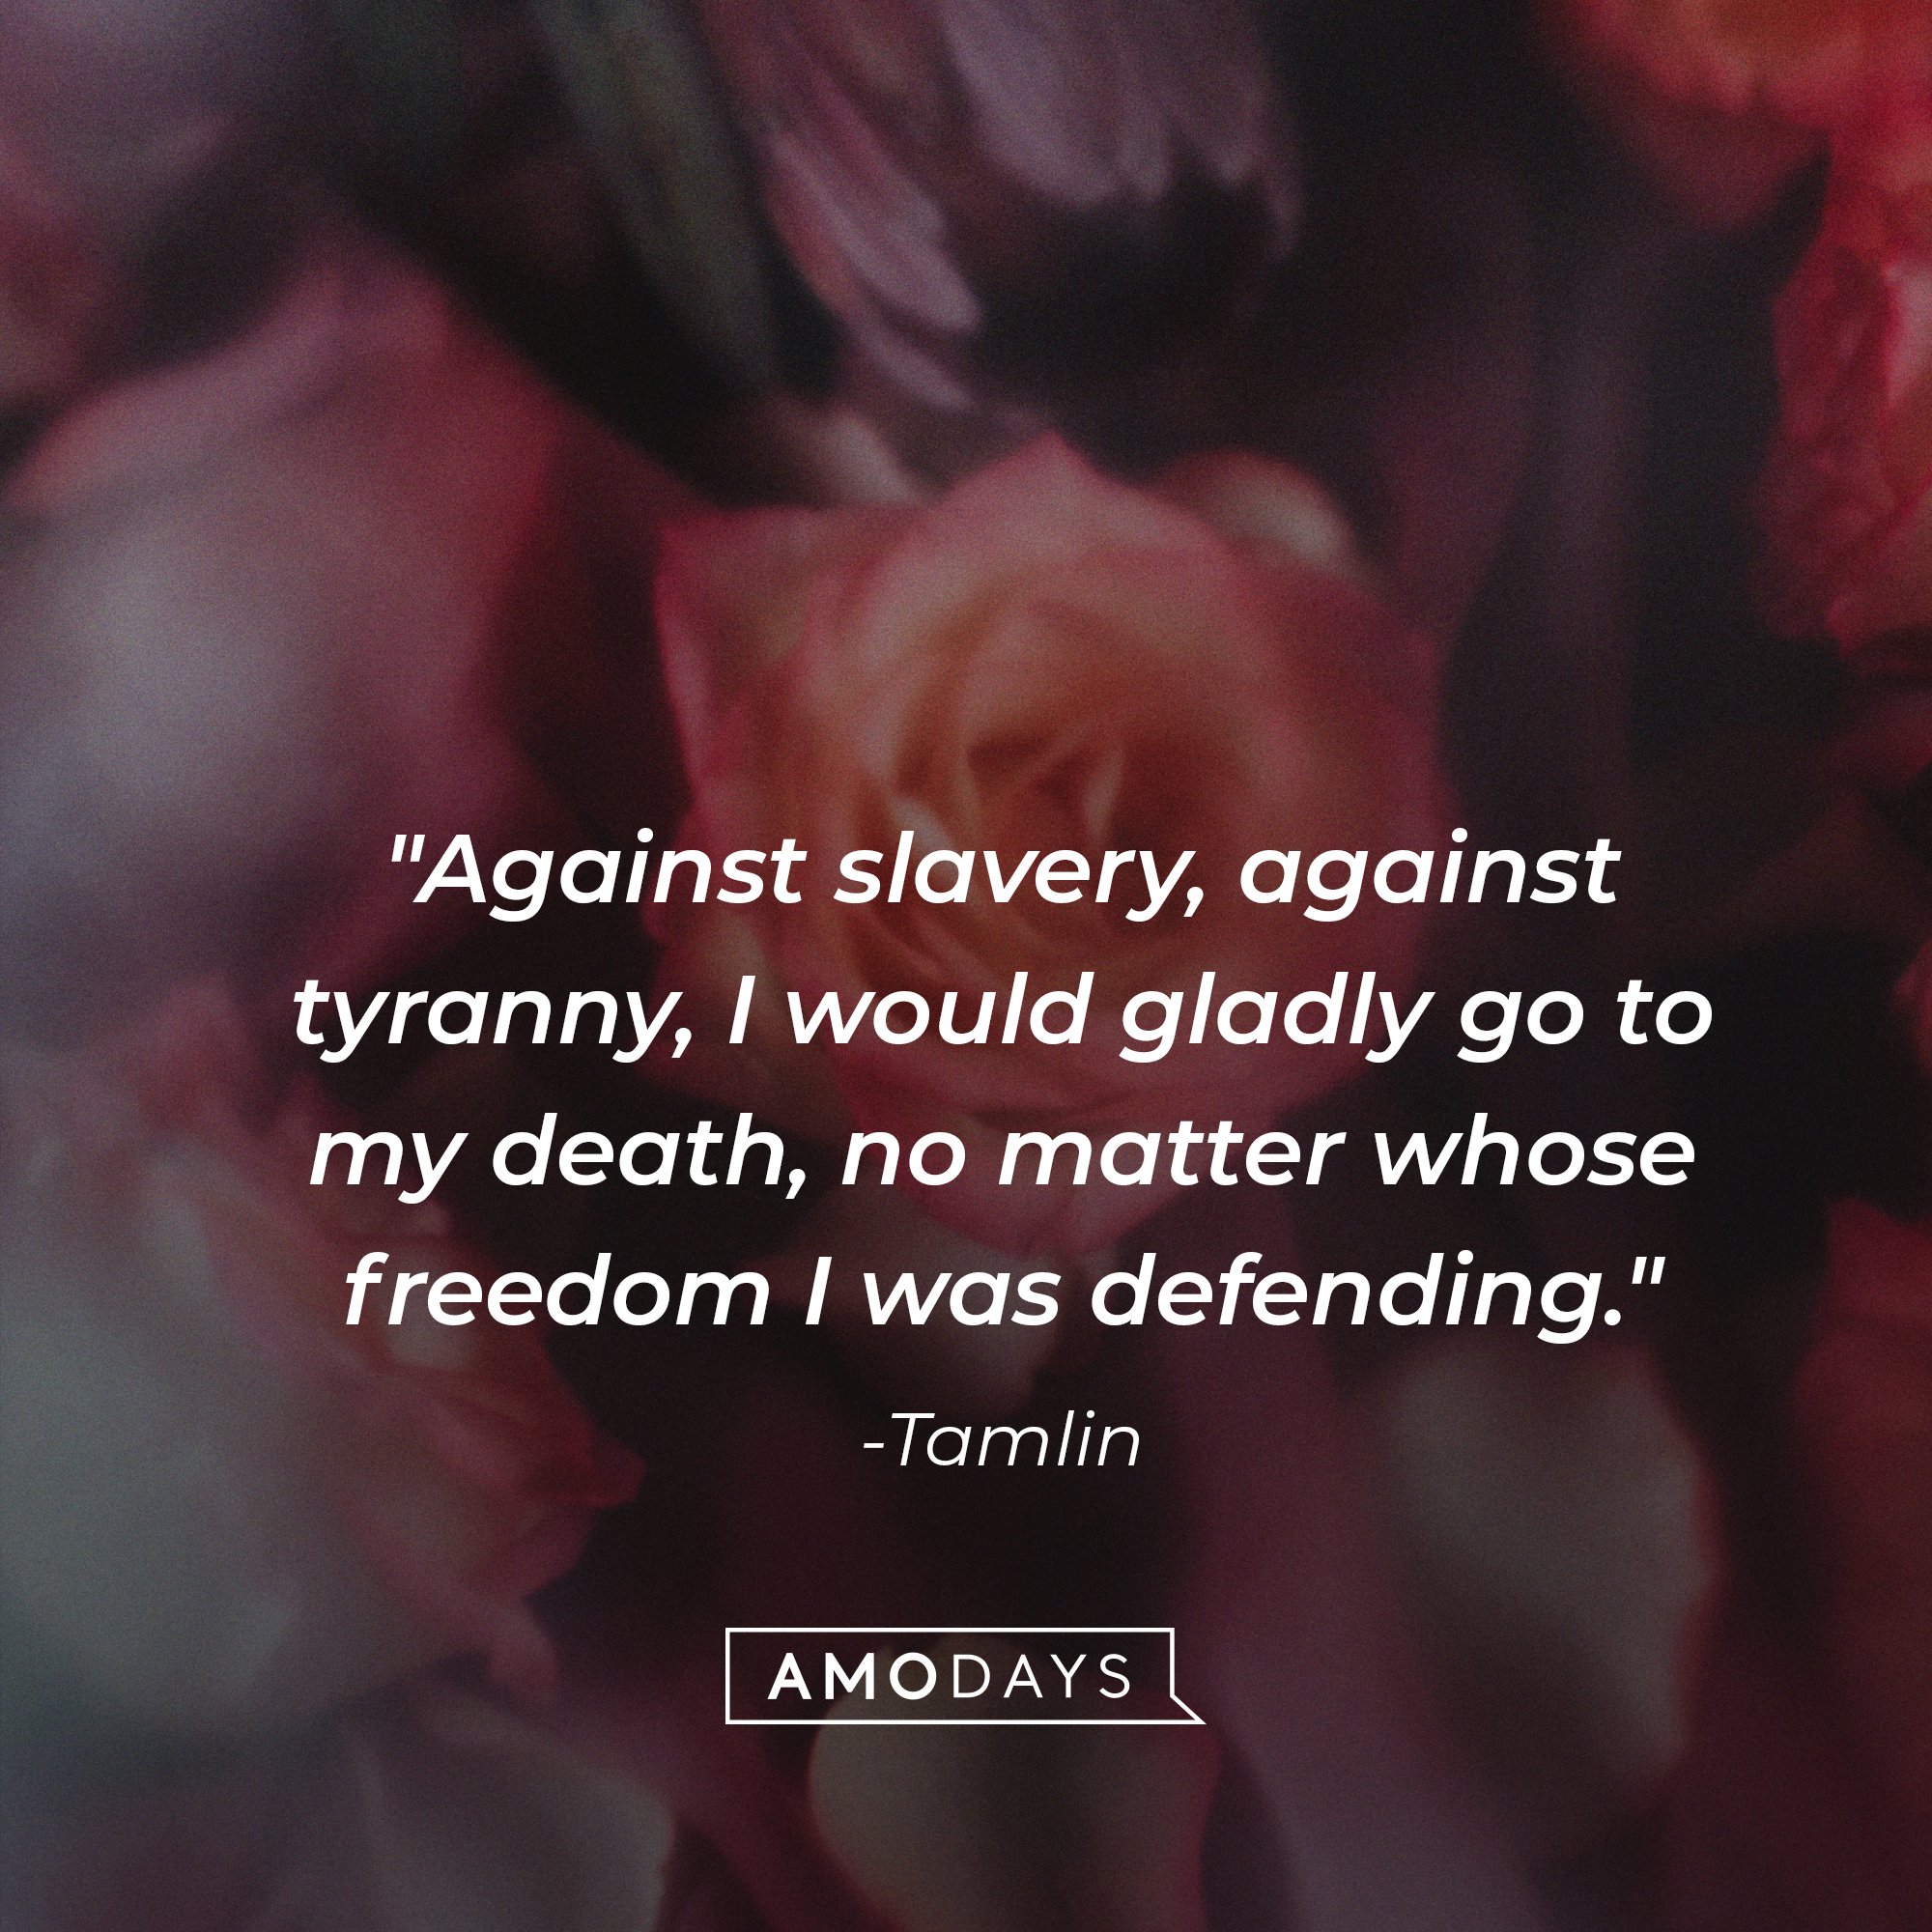 Tamlin‘s quote: "Against slavery, against tyranny, I would gladly go to my death, no matter whose freedom I was defending." |  Image: AmoDays